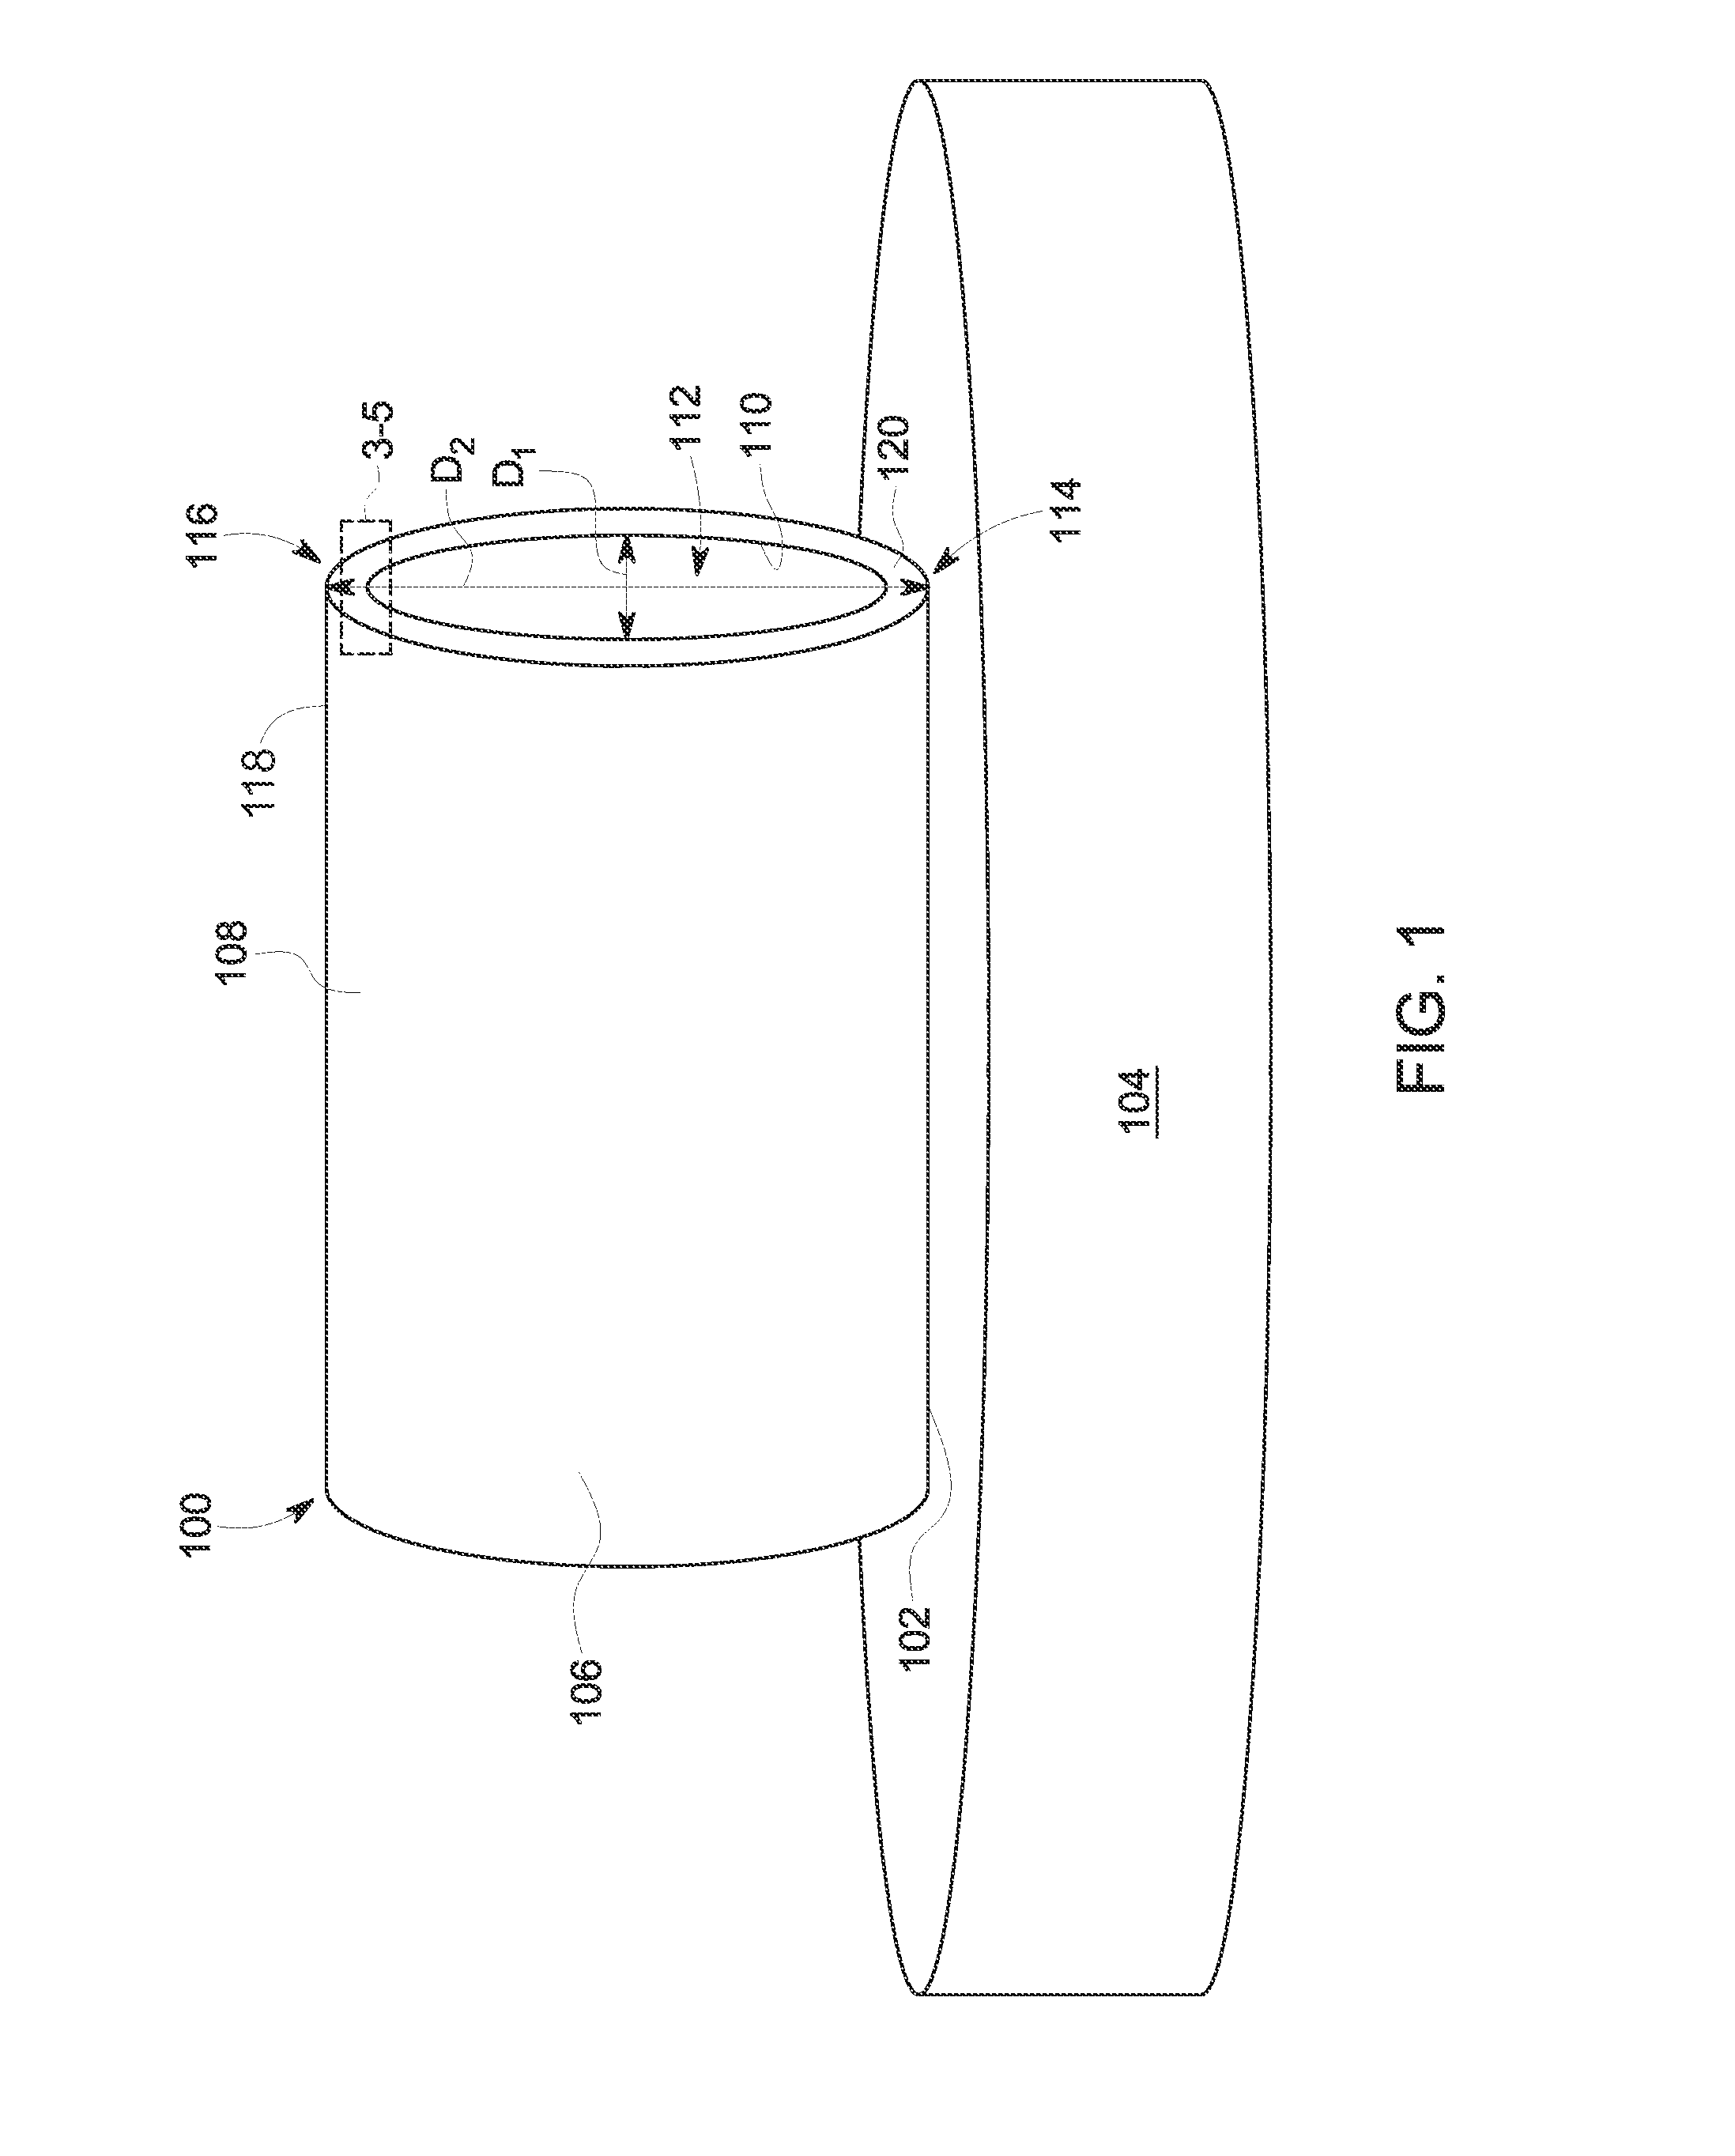 Methods for manufacturing an additively manufactured fuel contacting component to facilitate reducing coke formation